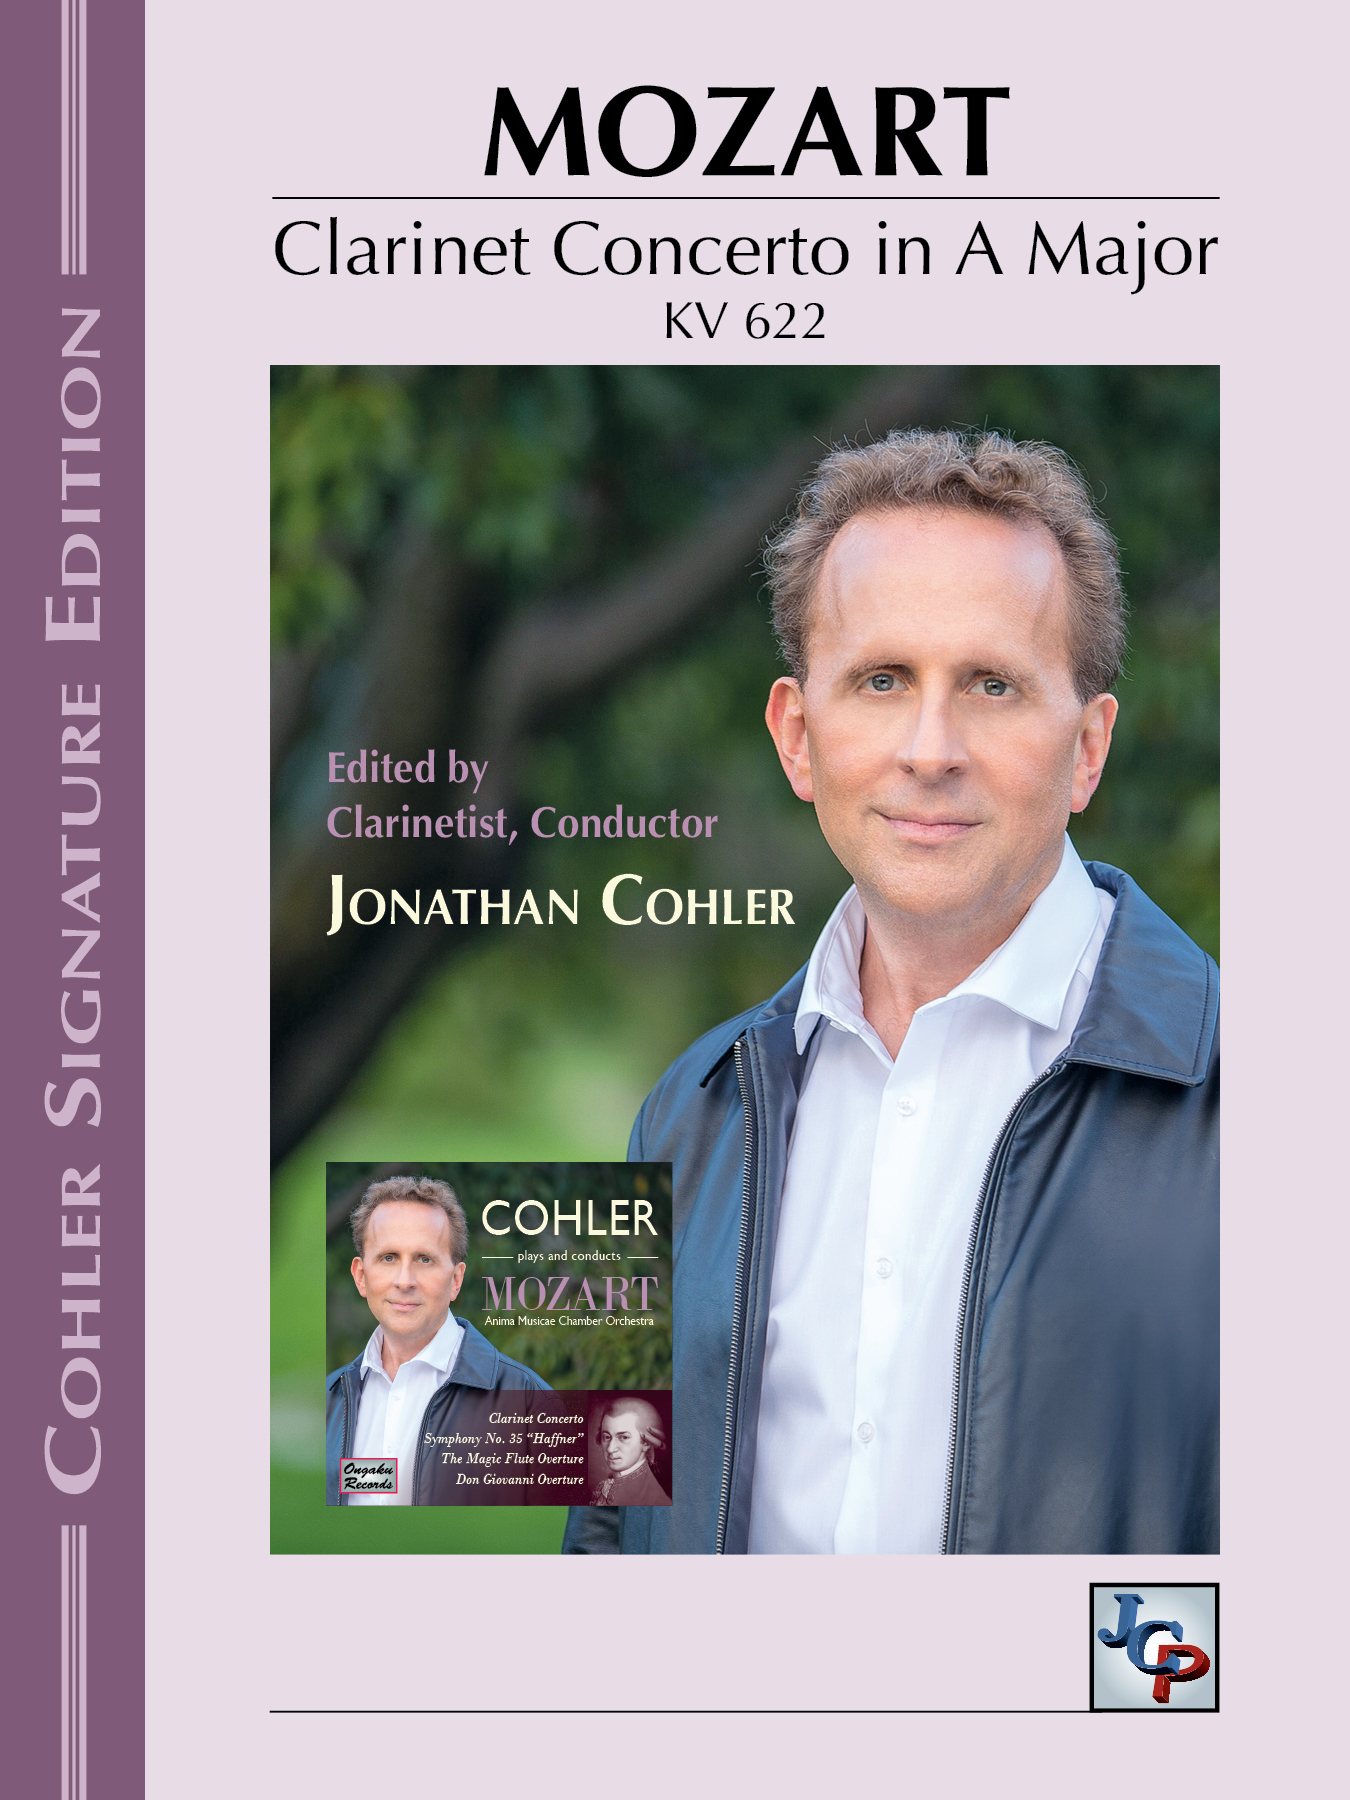 Cohler plays and conducts Mozart